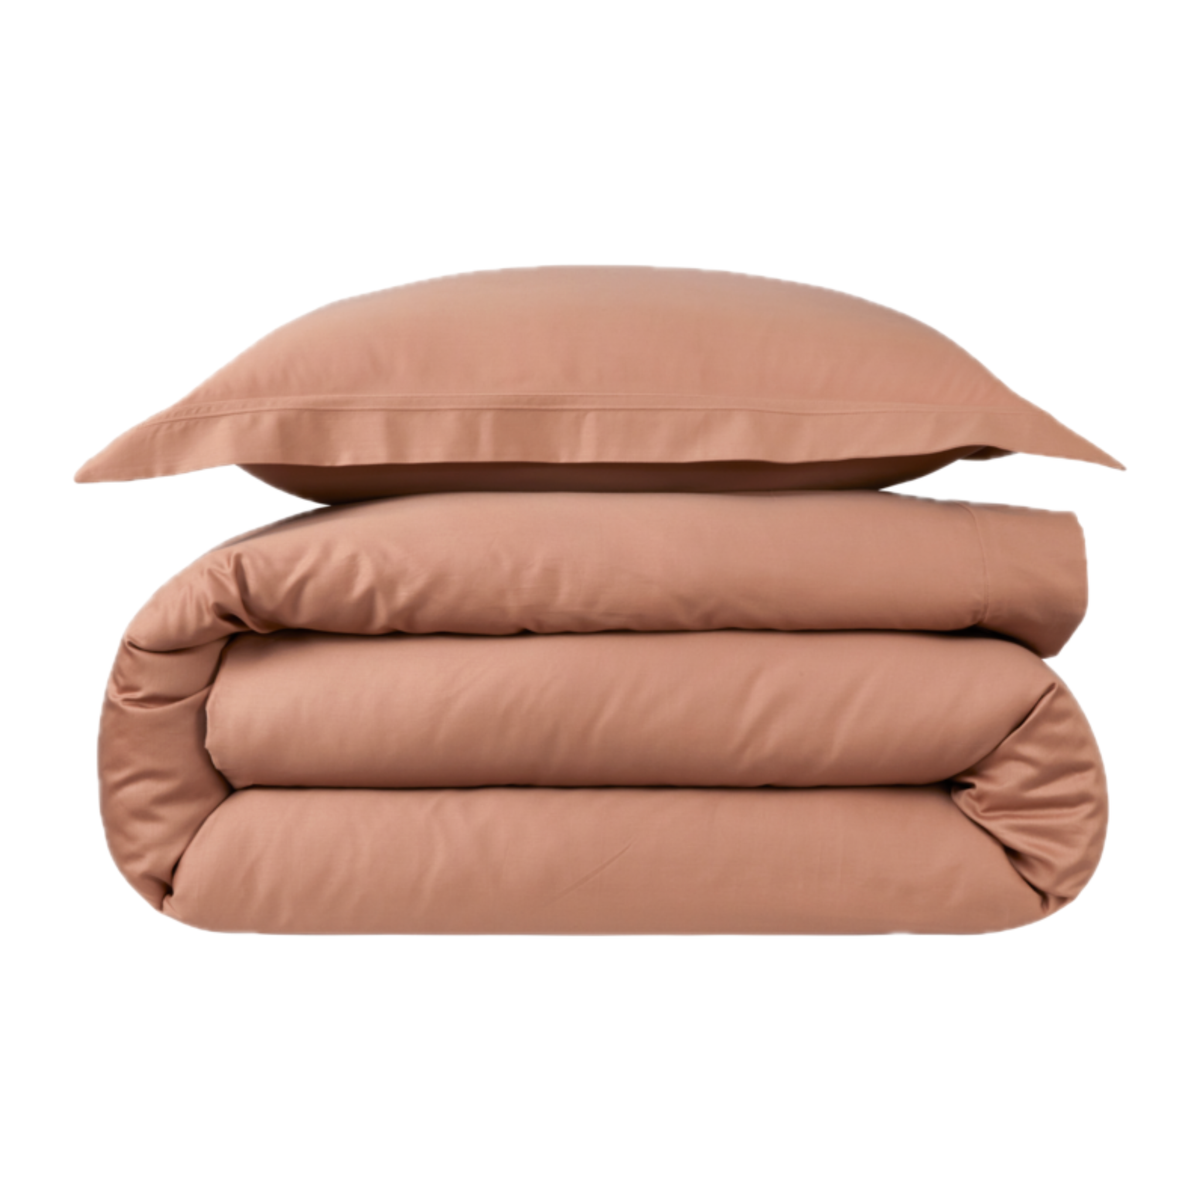 Stack of Pillow and Sheets of Yves Delorme Triomphe Bedding in Sienna Color